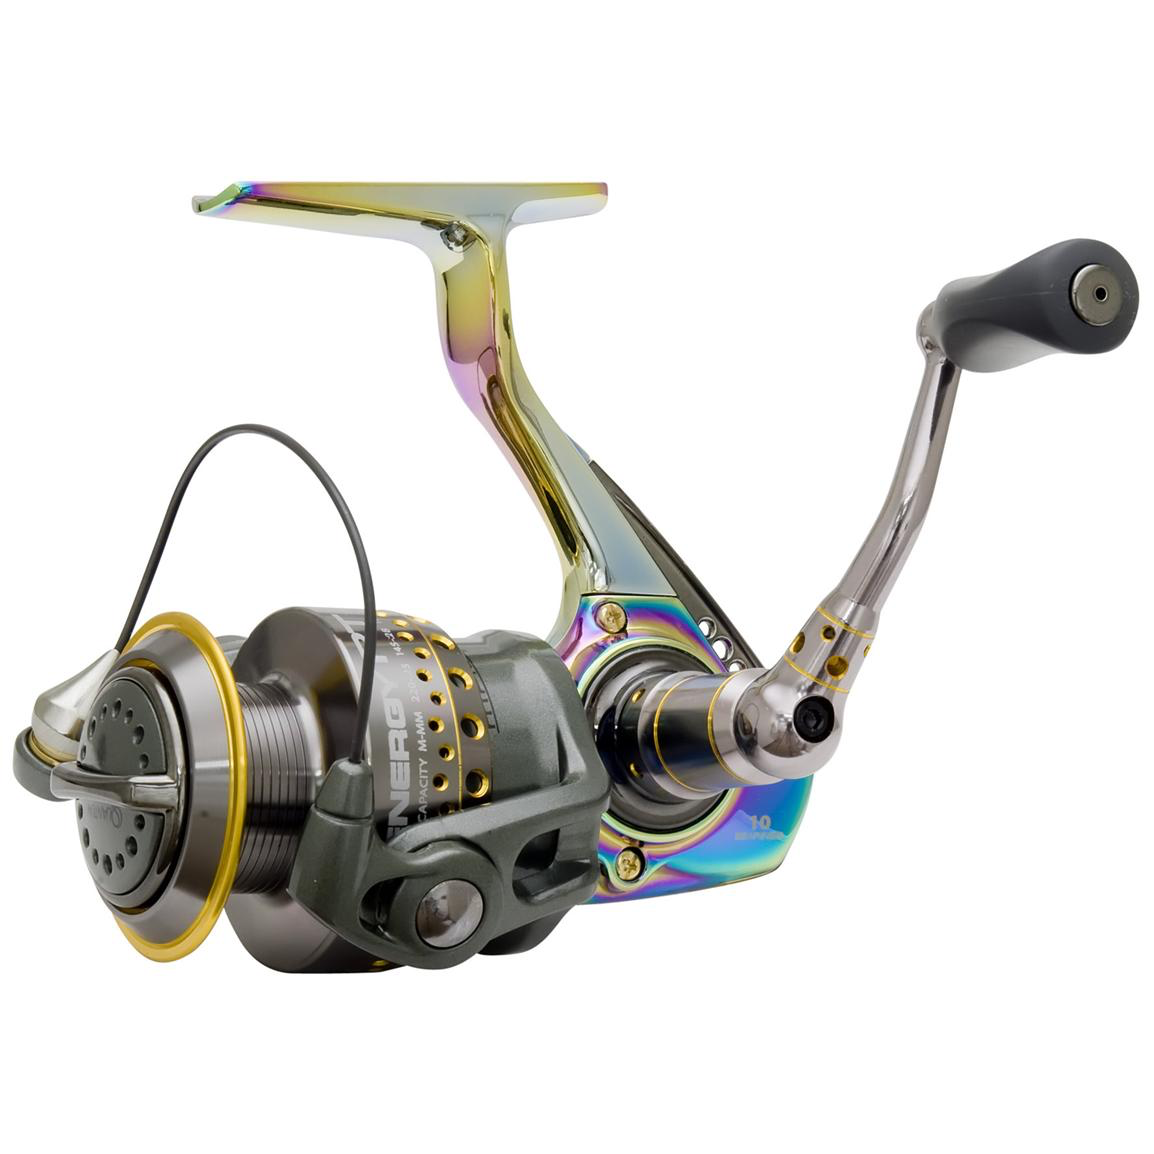 Quantum Exo Pt Casting Reel - Fishing Rods, Reels, Line, and Knots